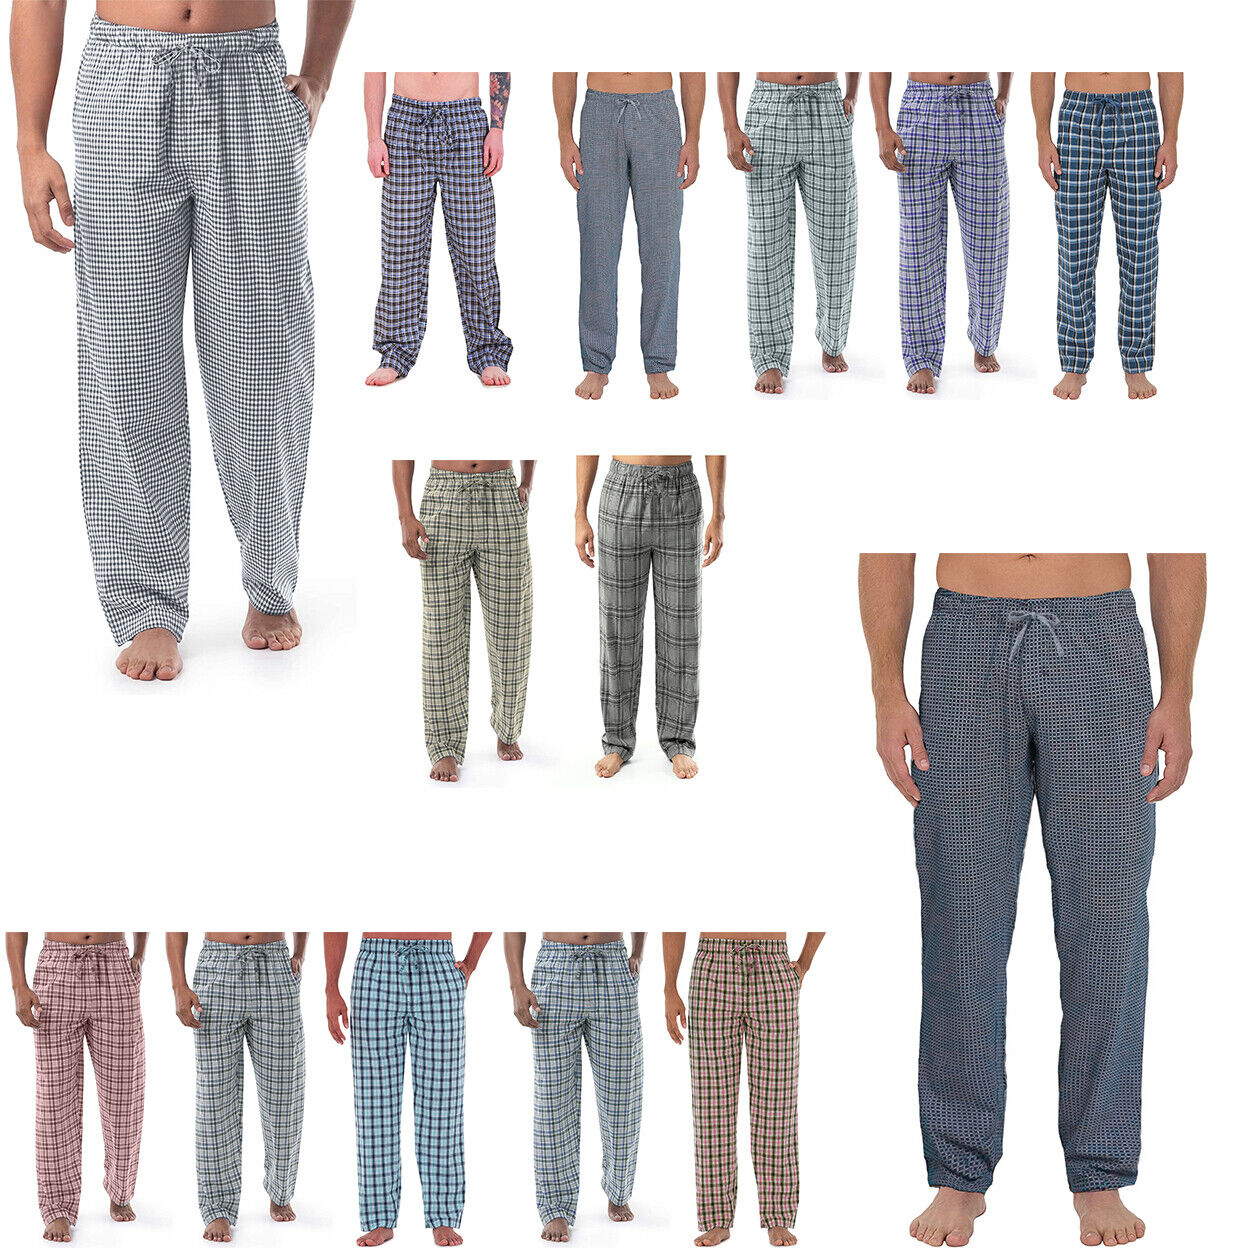 Multi-Pack: Men's Ultra-Soft Solid & Plaid Cotton Jersey Knit Comfy Sleep Lounge Pajama Pants - 3-pack Solid, Medium